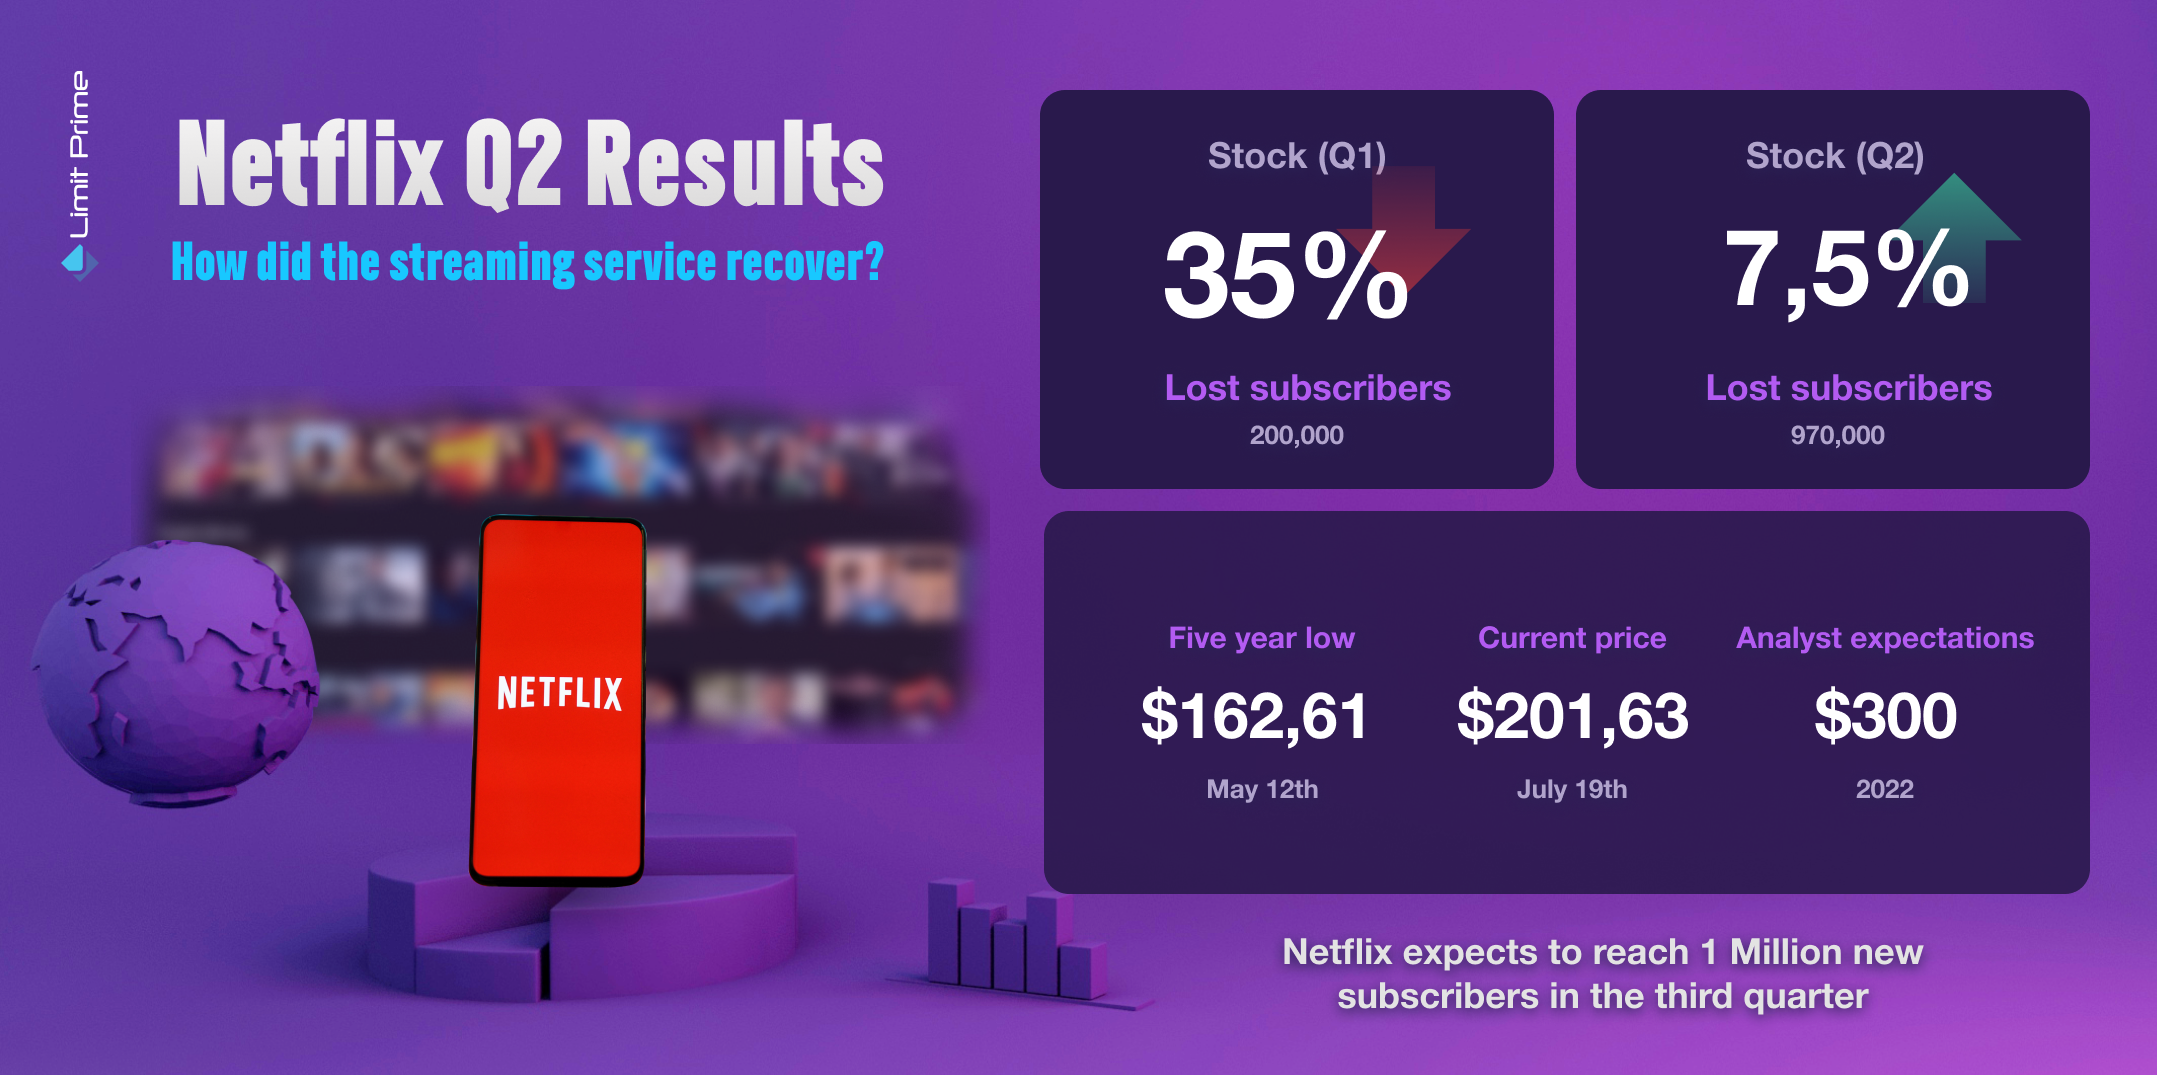 How did Netflix manage to recover? - Q2 Results